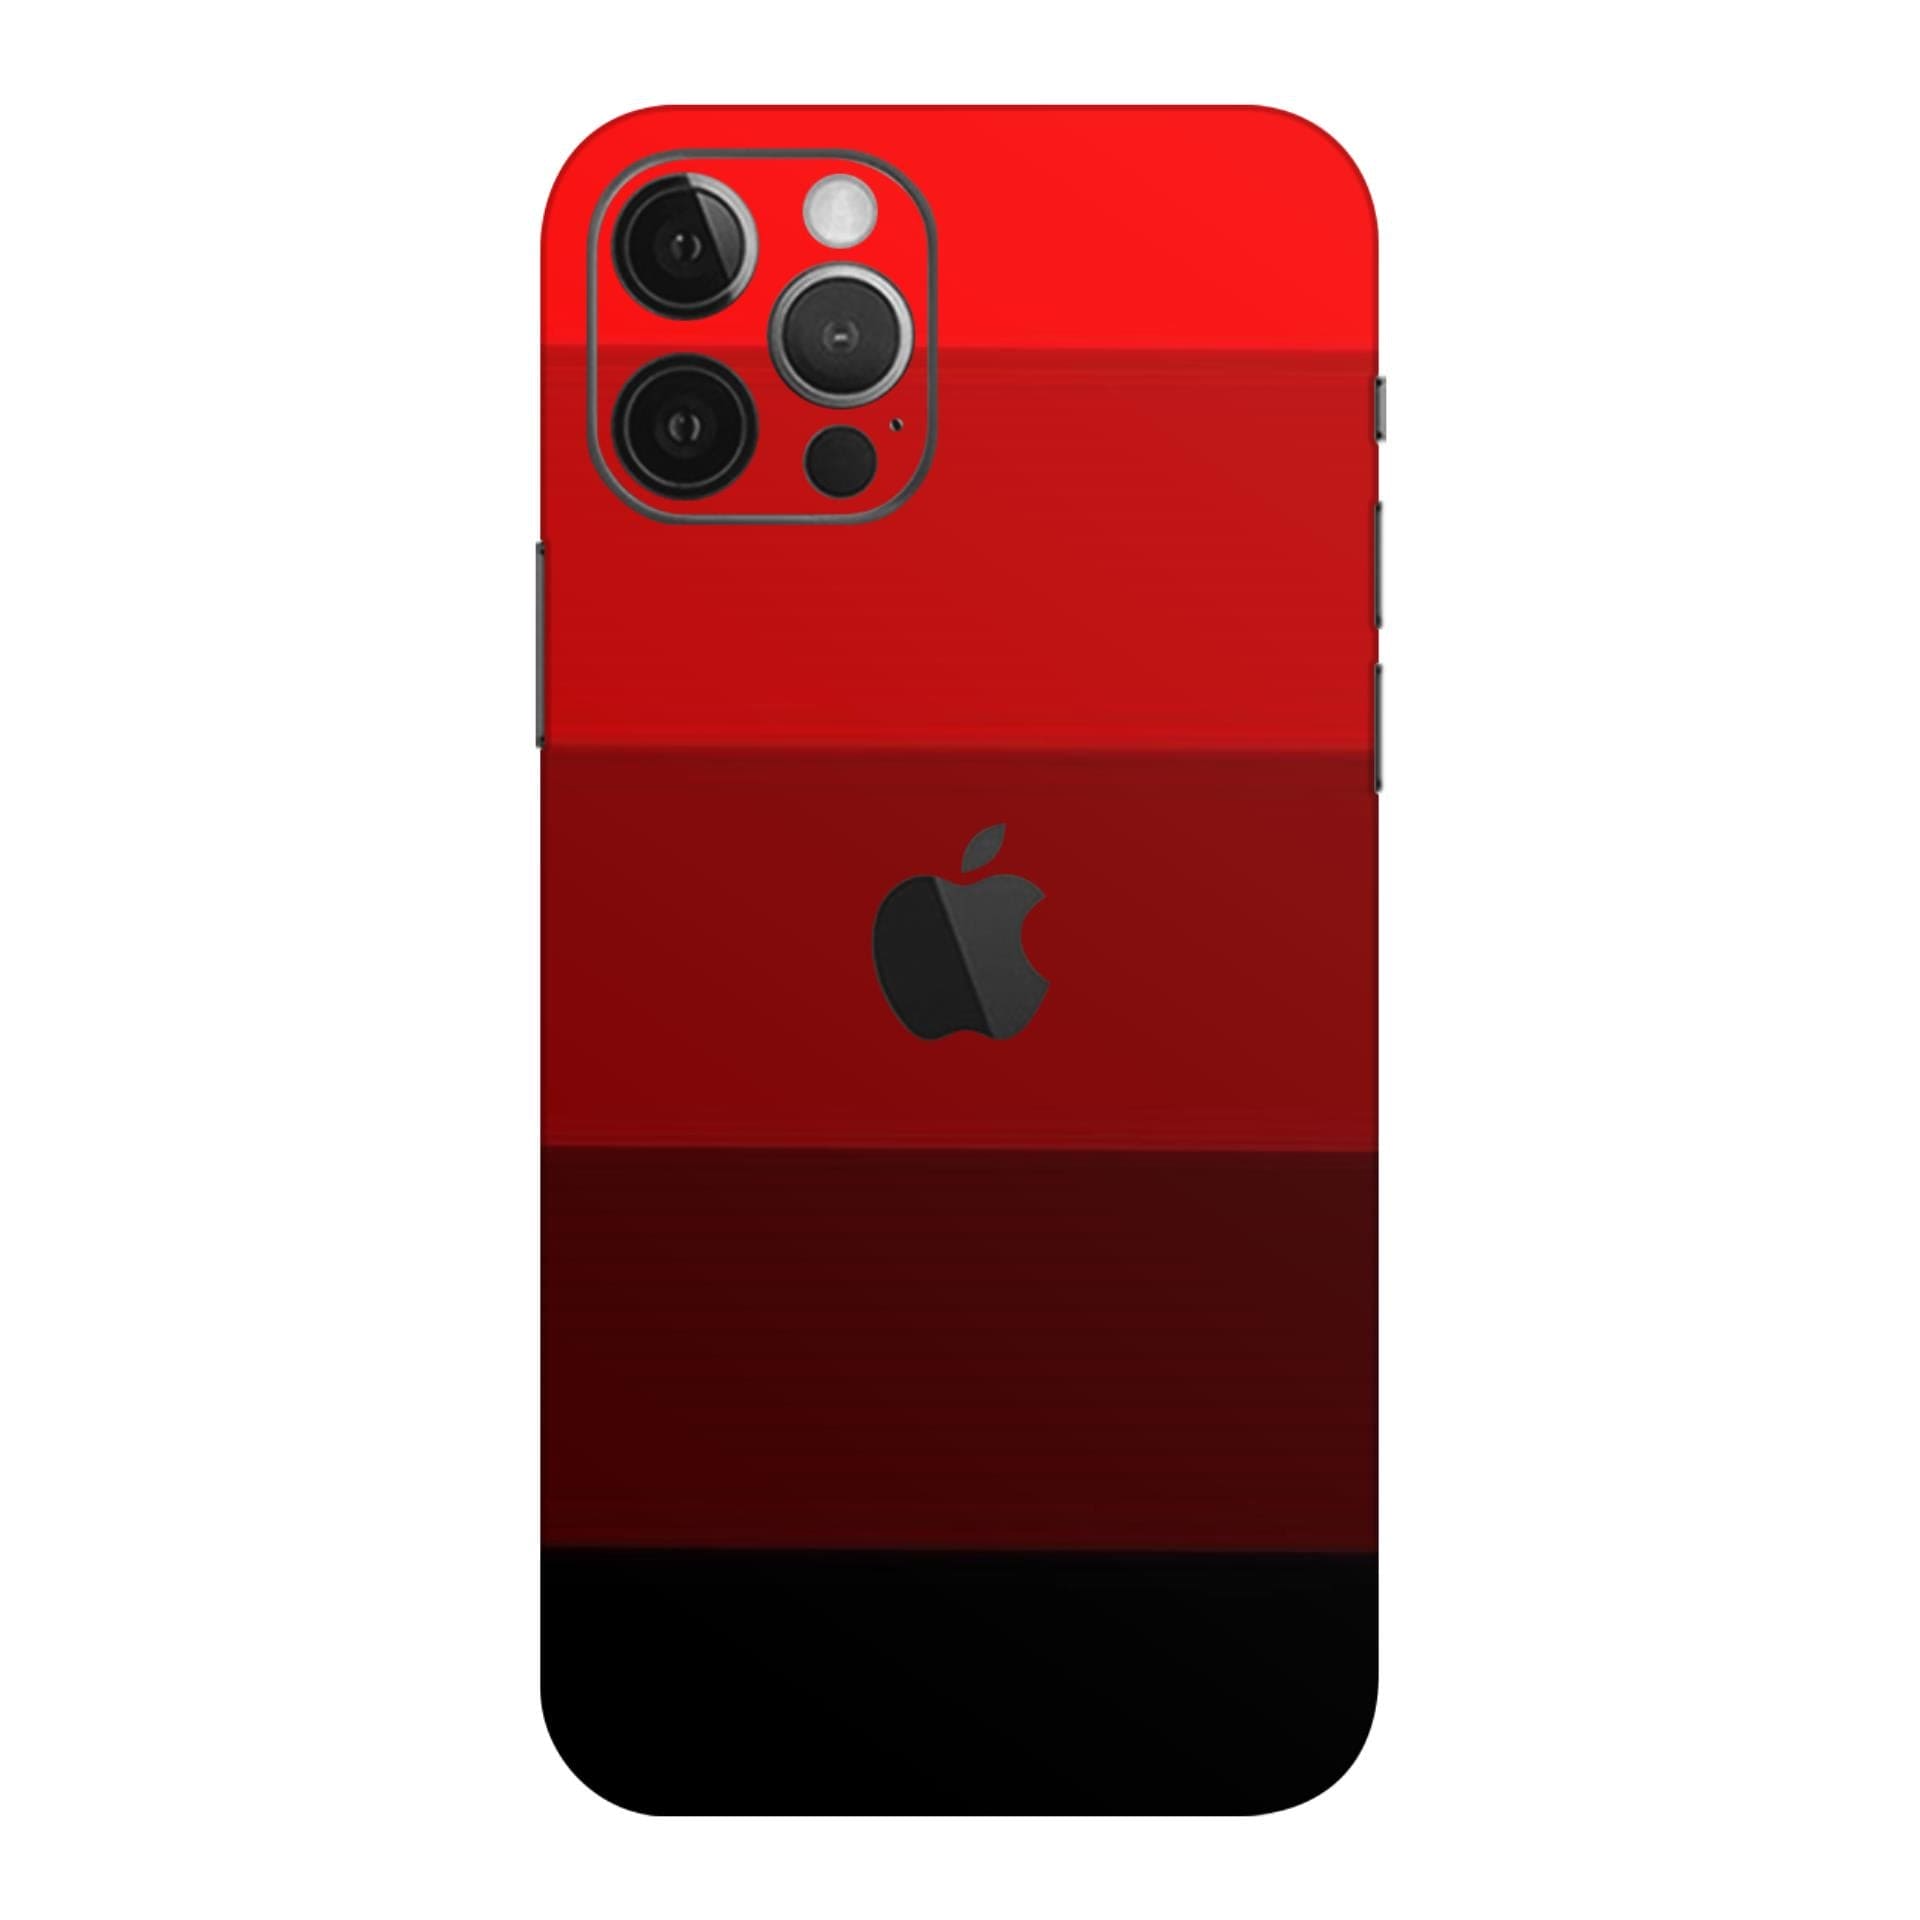 iphone 12 Pro Max Palette Red skins